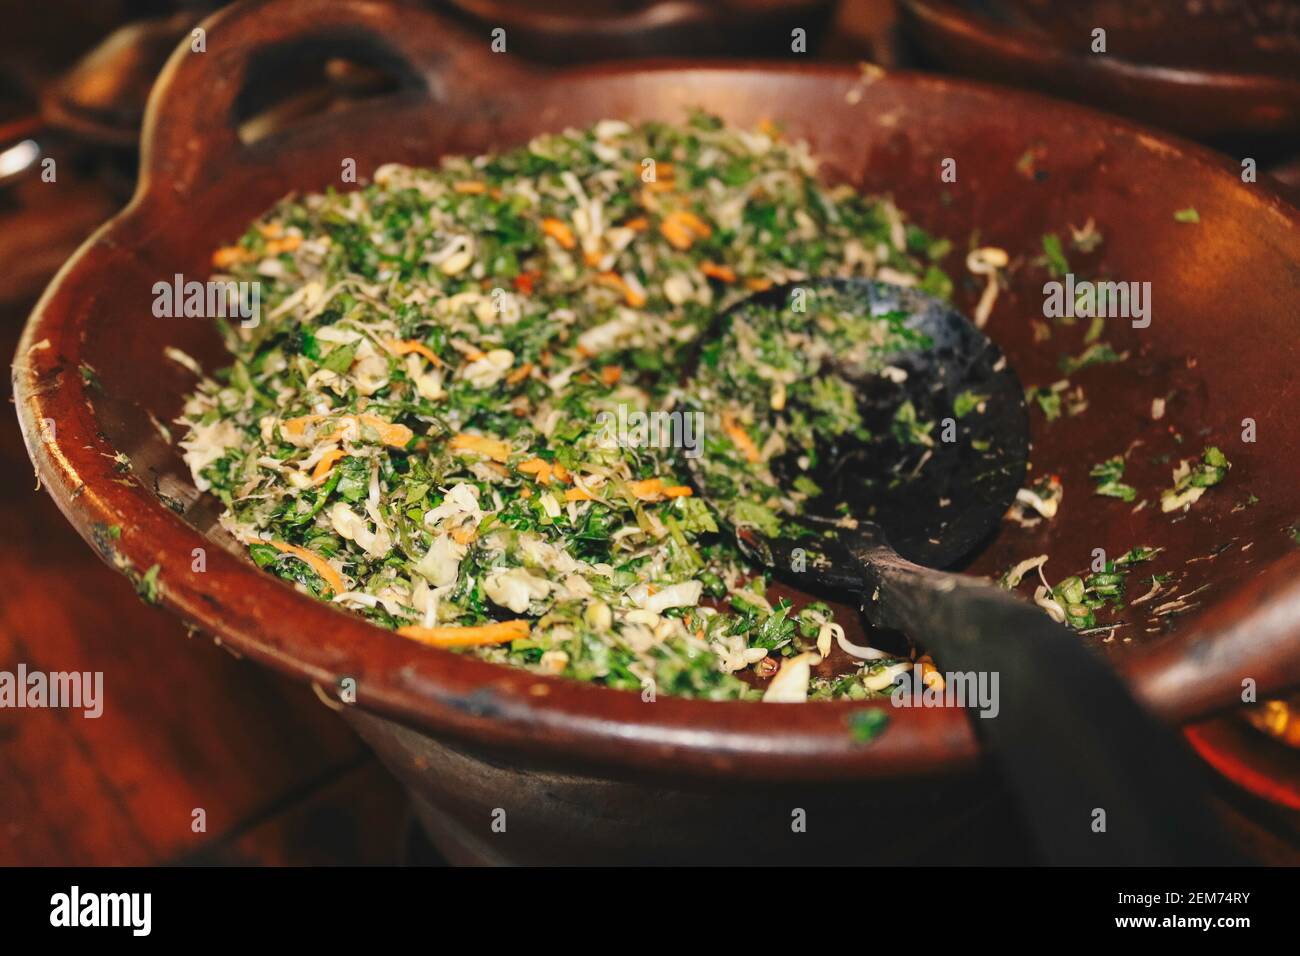 Trancam, a traditional food from Central Java, Indonesia. Made from vegetables, mixed with grated coconut. Stock Photo